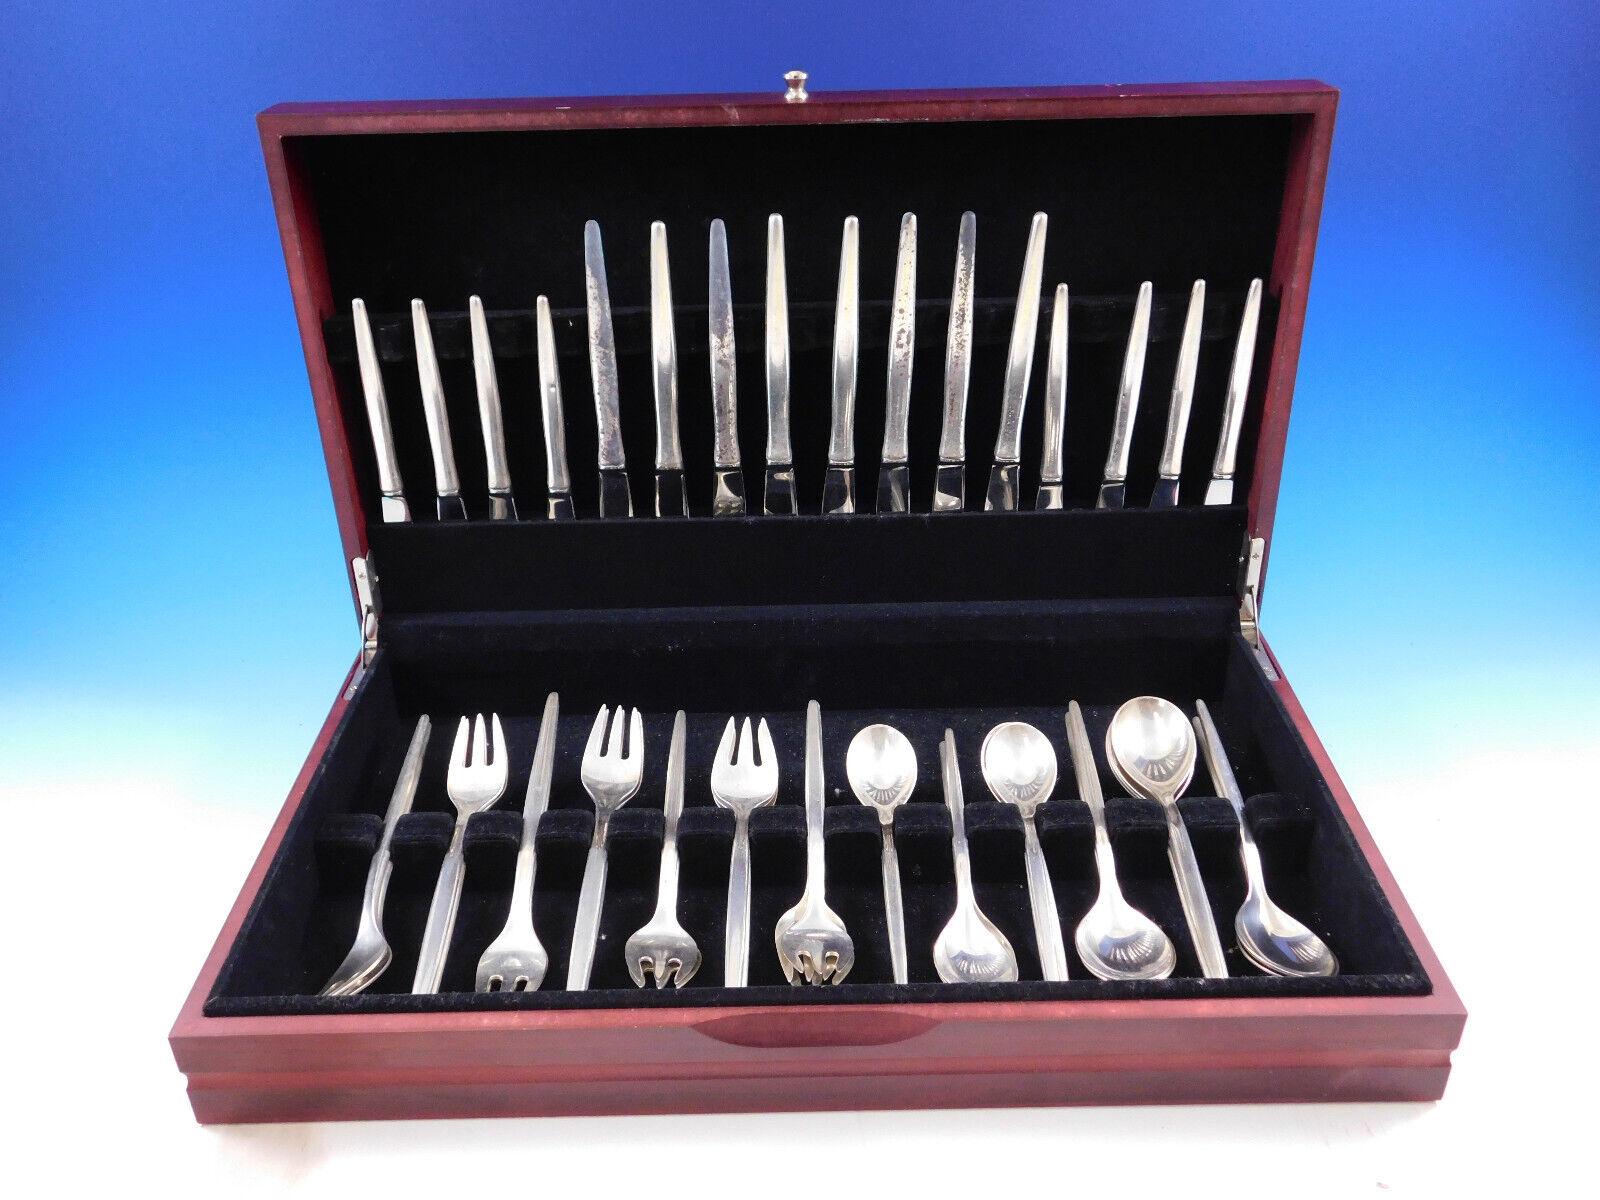 Stunning Scandinavian Modern Tulip by A. Michelsen sterling silver Flatware set with modern elongated handles, 48 pieces. This set includes:

8 Knives, 8 1/2